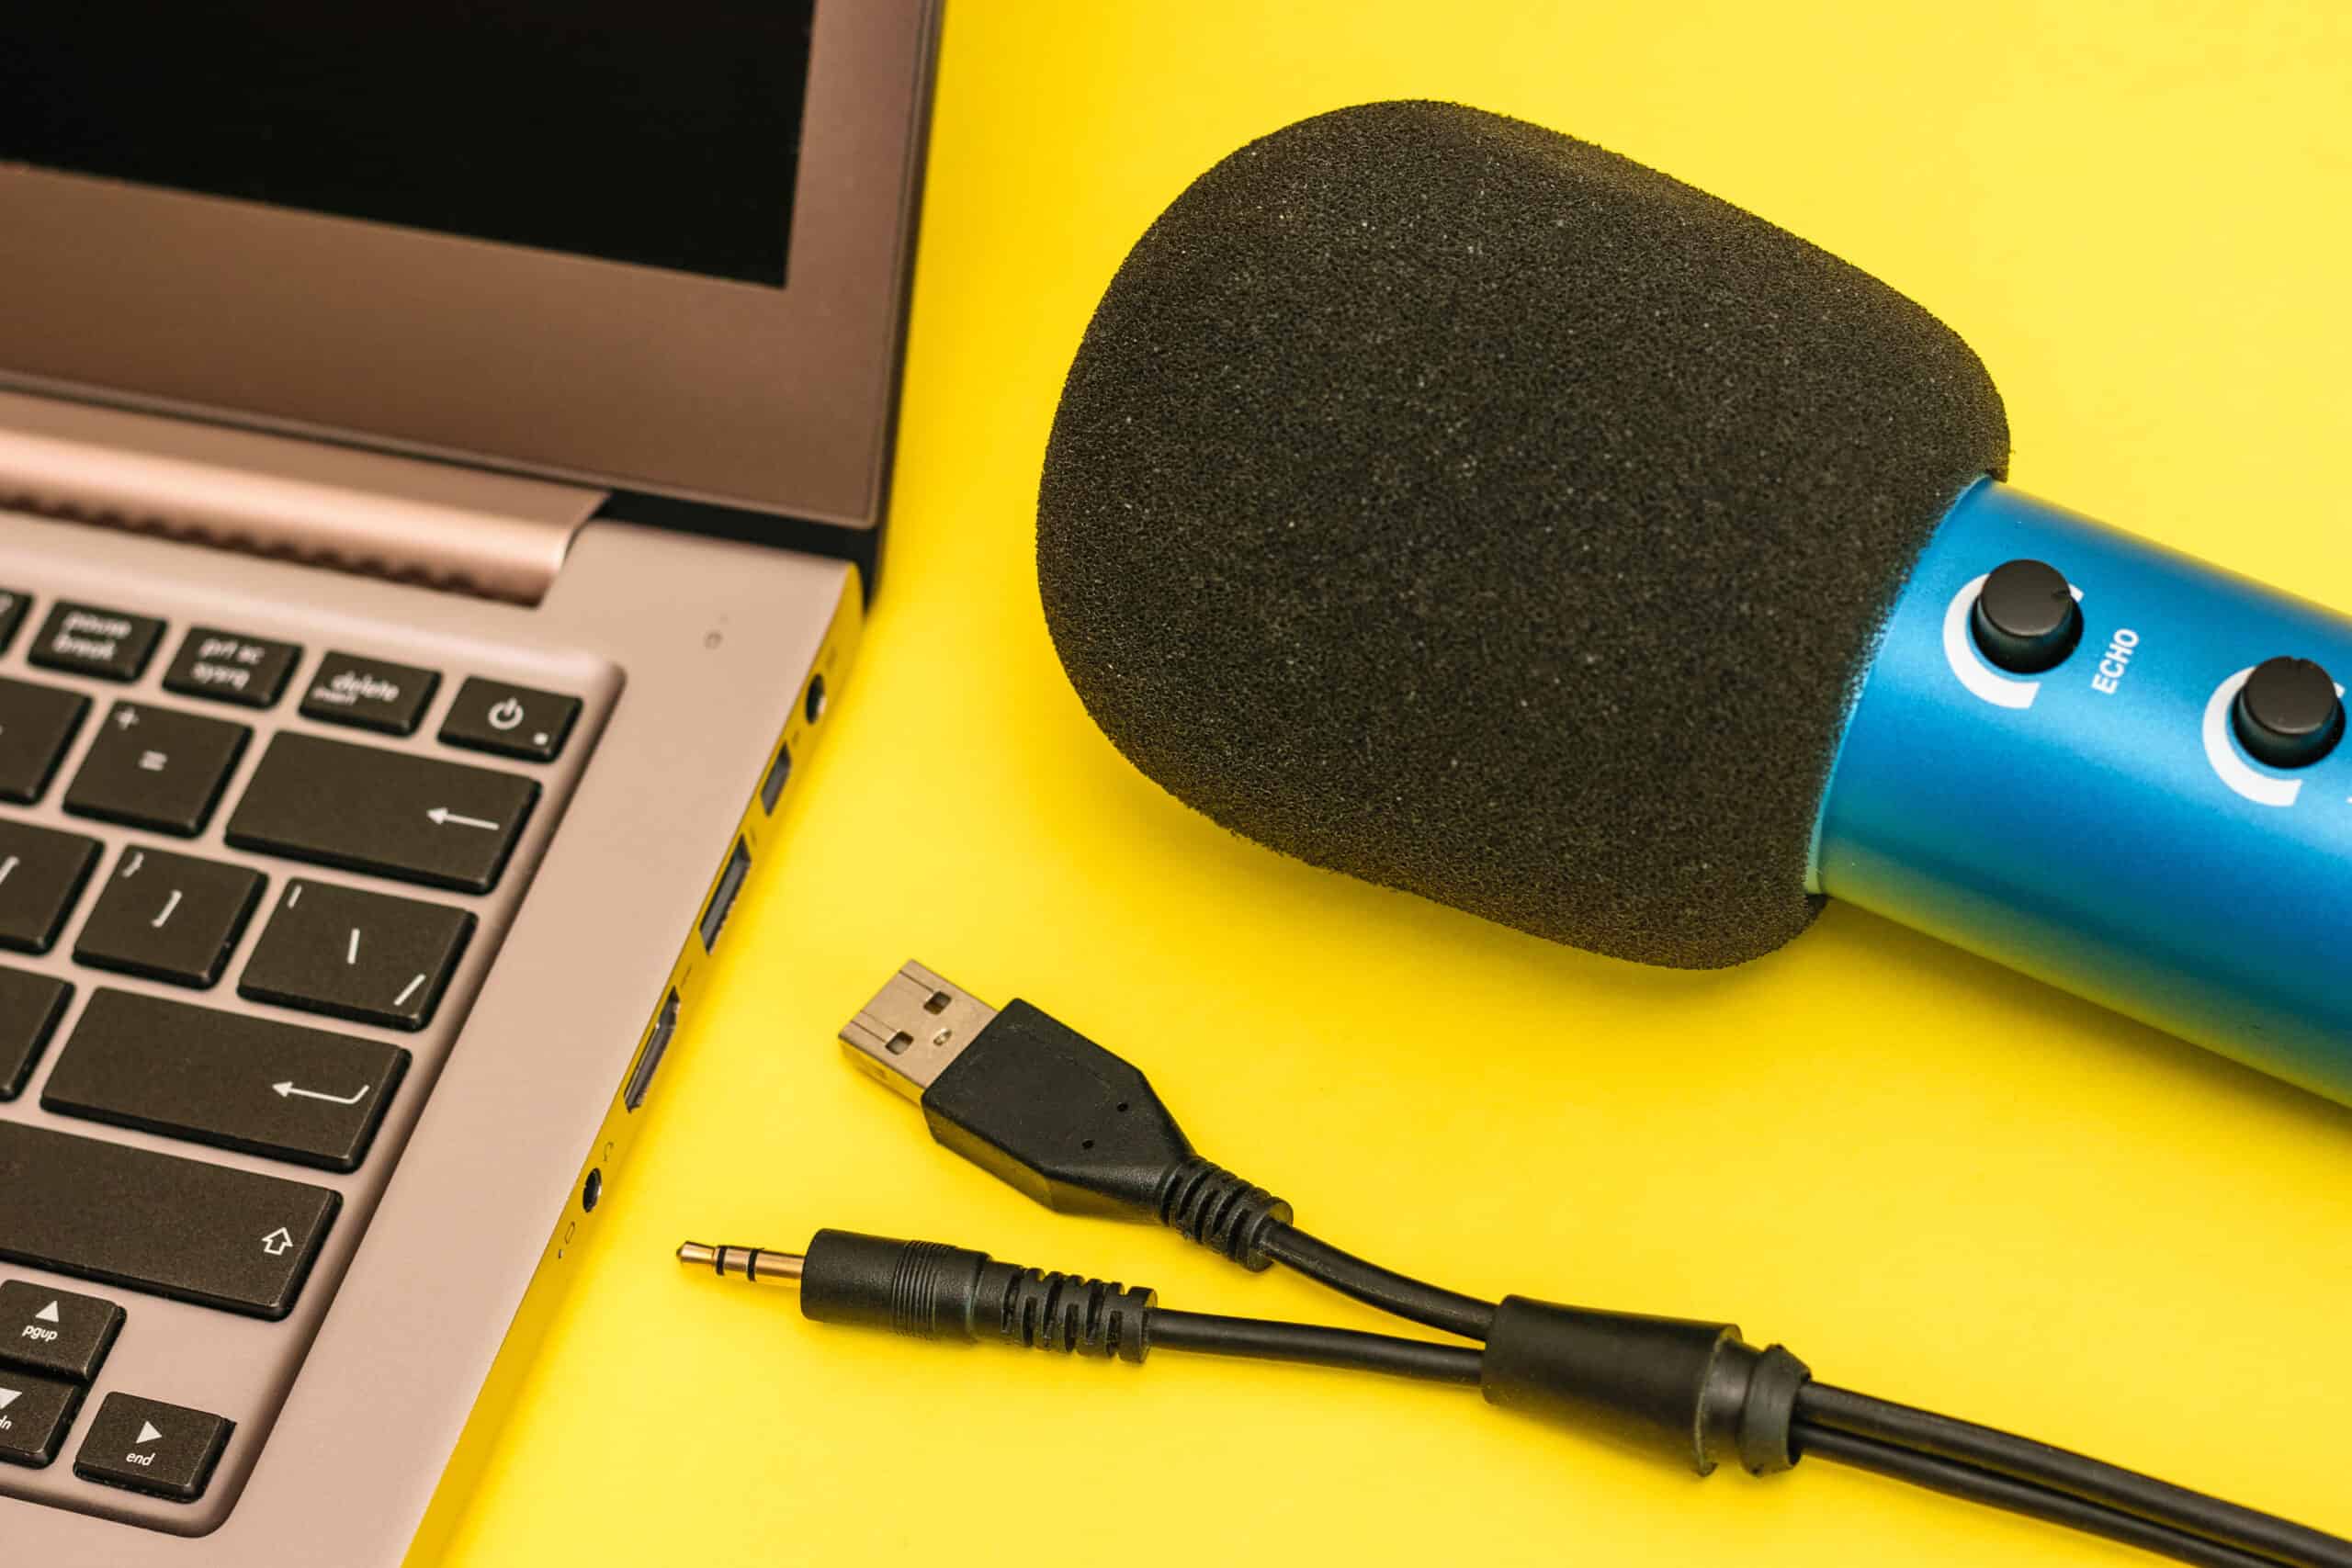 What Are The Advantages Of A USB Microphone